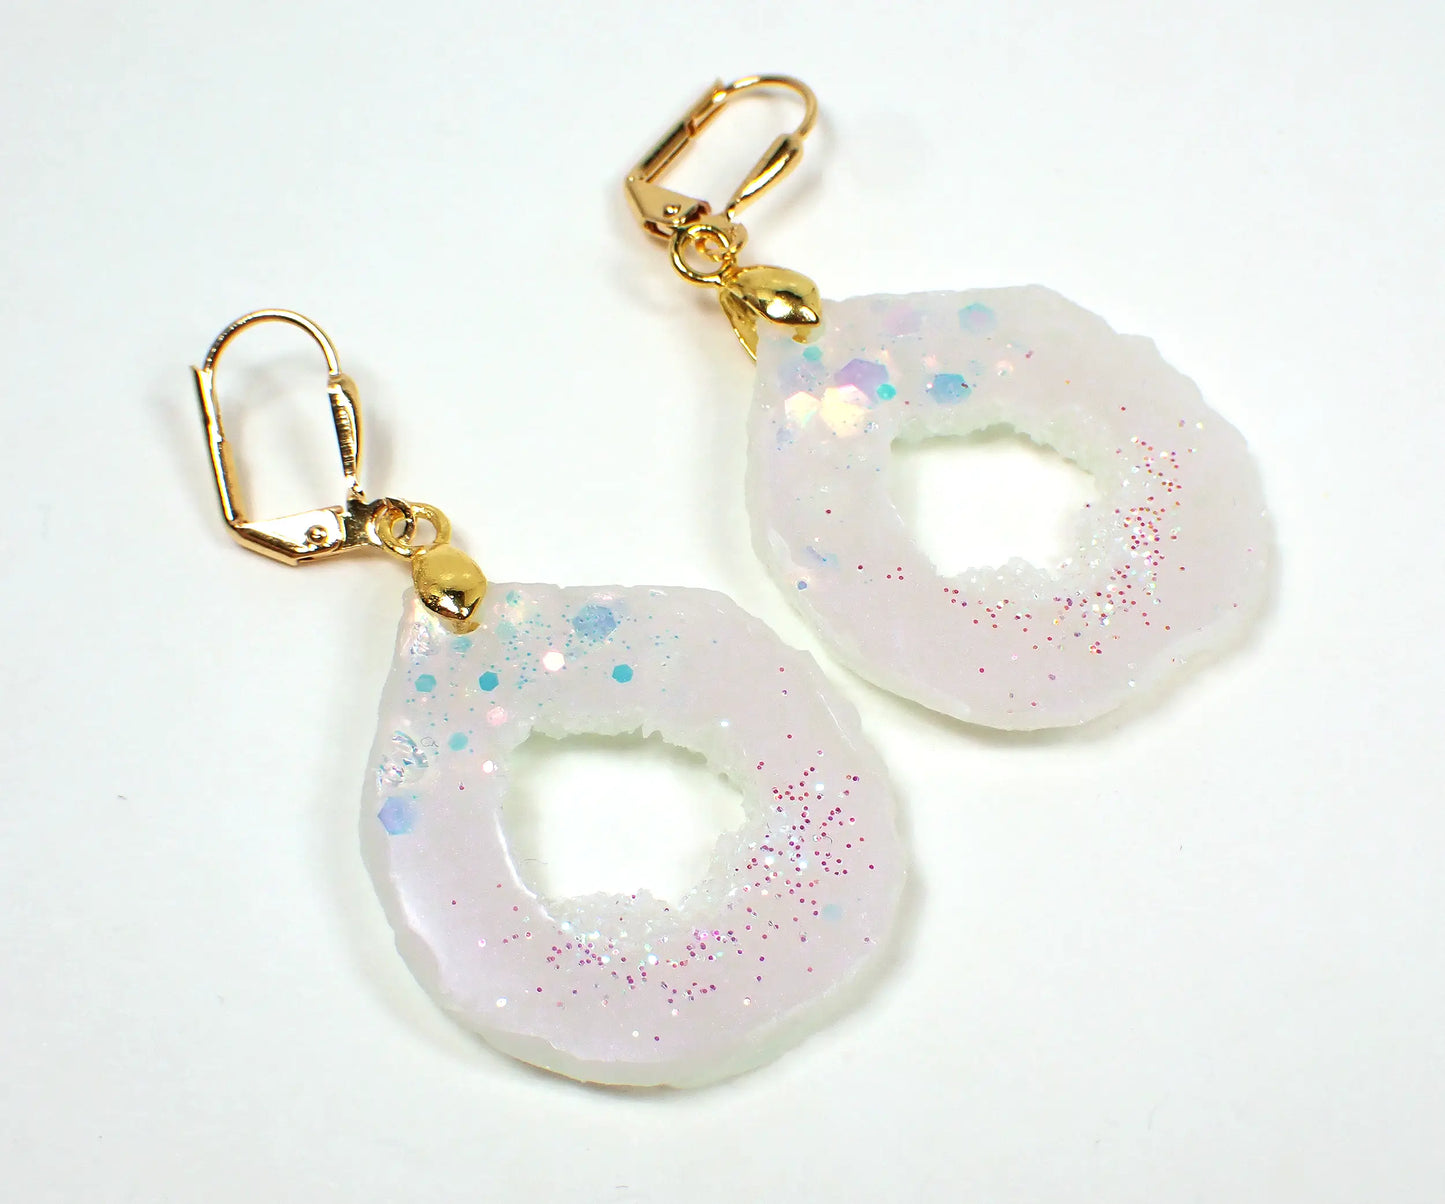 Iridescent Glitter and Pearly White Druzy Geode Style Handmade Resin Rounded Teardrop Earrings Hook Lever Back or Clip On